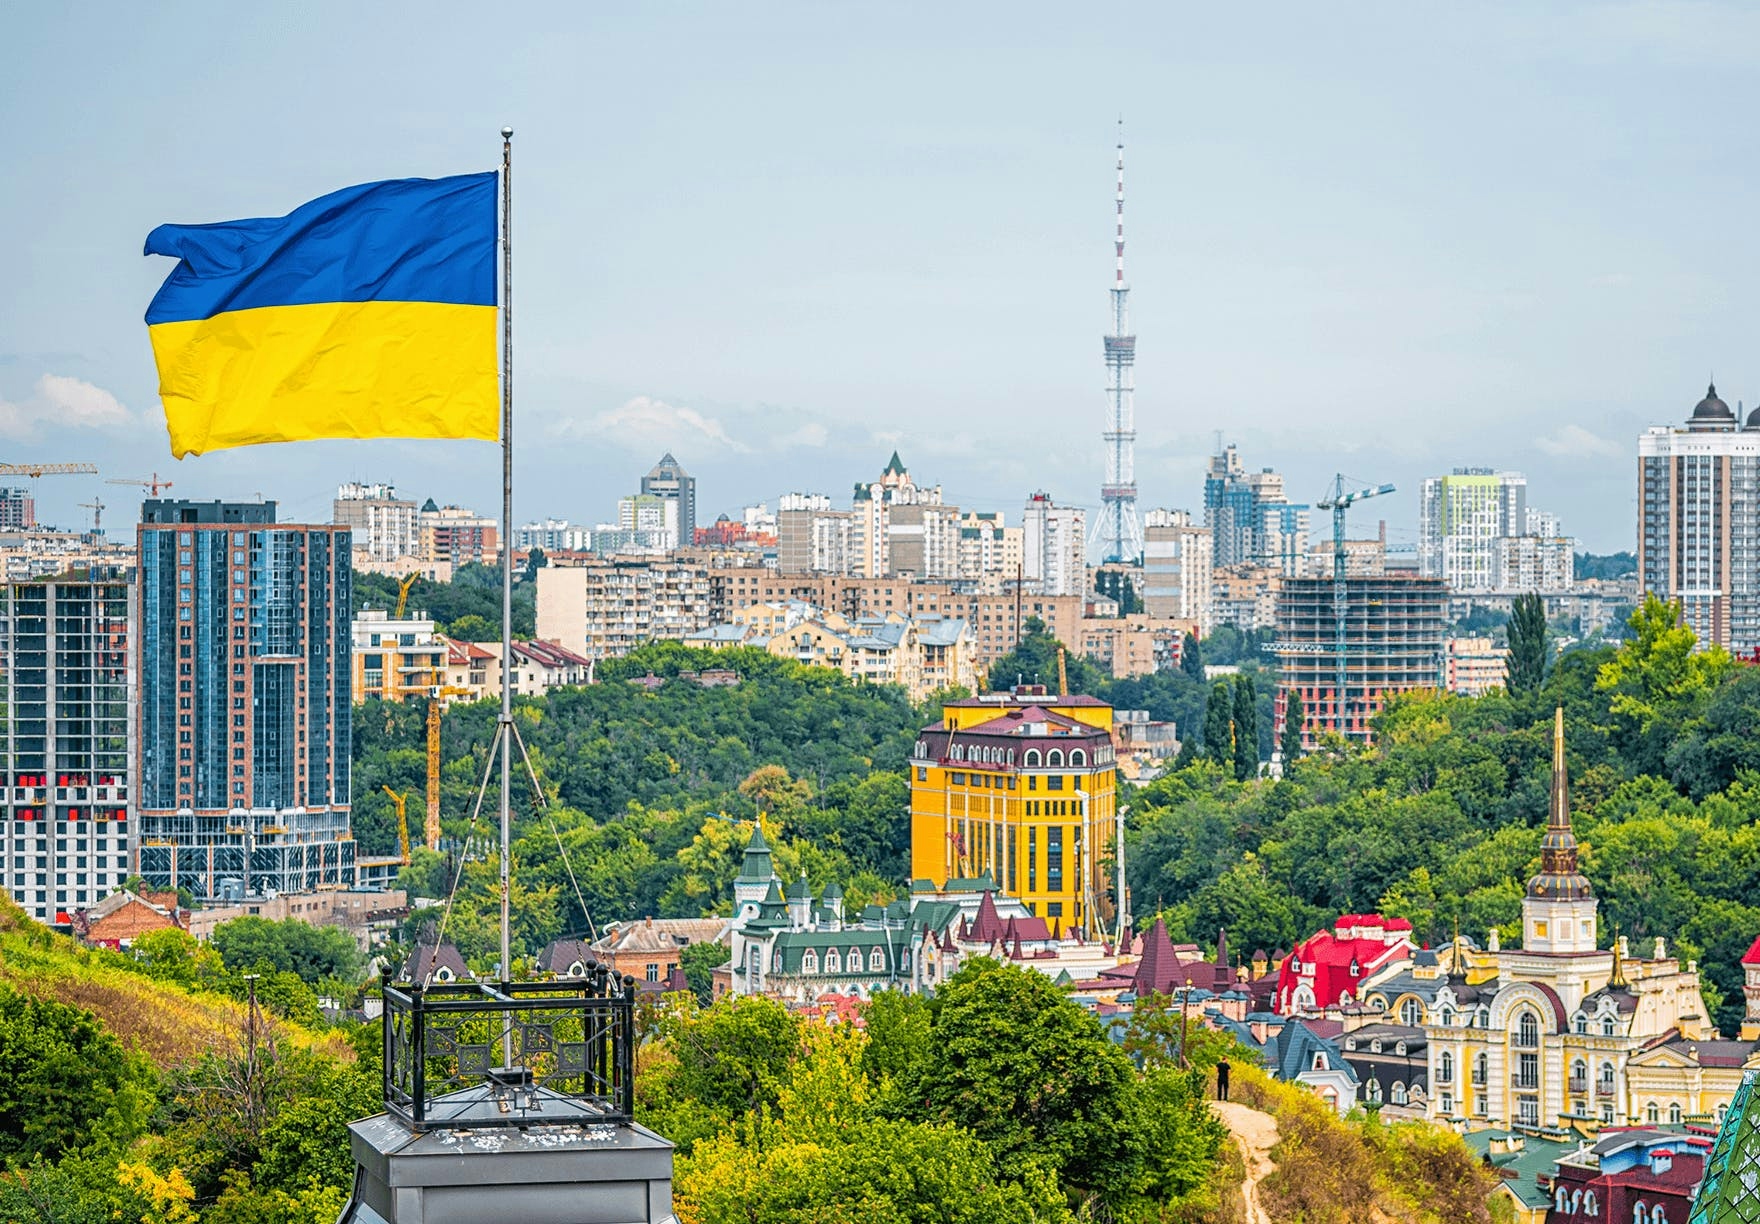 The flag of Ukraine waving above the city